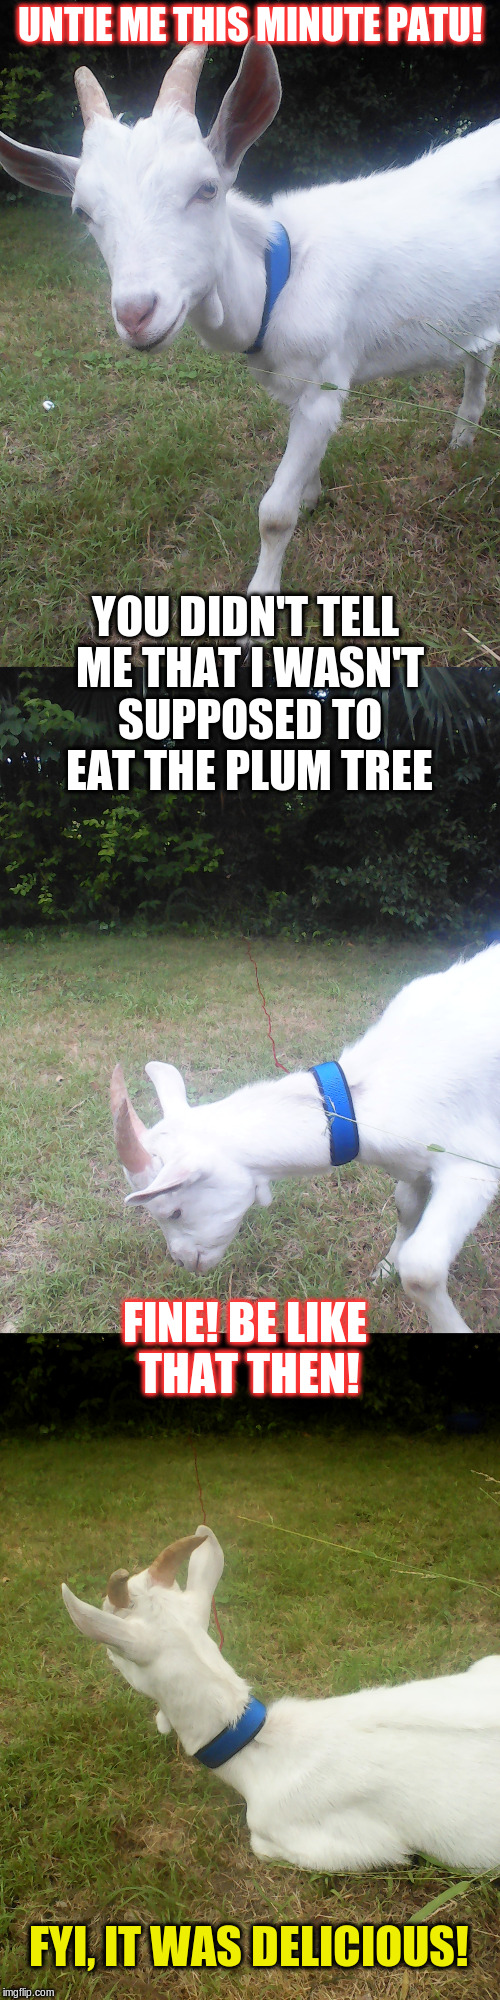 A very naughty goat |  UNTIE ME THIS MINUTE PATU! YOU DIDN'T TELL ME THAT I WASN'T SUPPOSED TO EAT THE PLUM TREE; FINE! BE LIKE THAT THEN! FYI, IT WAS DELICIOUS! | image tagged in goat | made w/ Imgflip meme maker